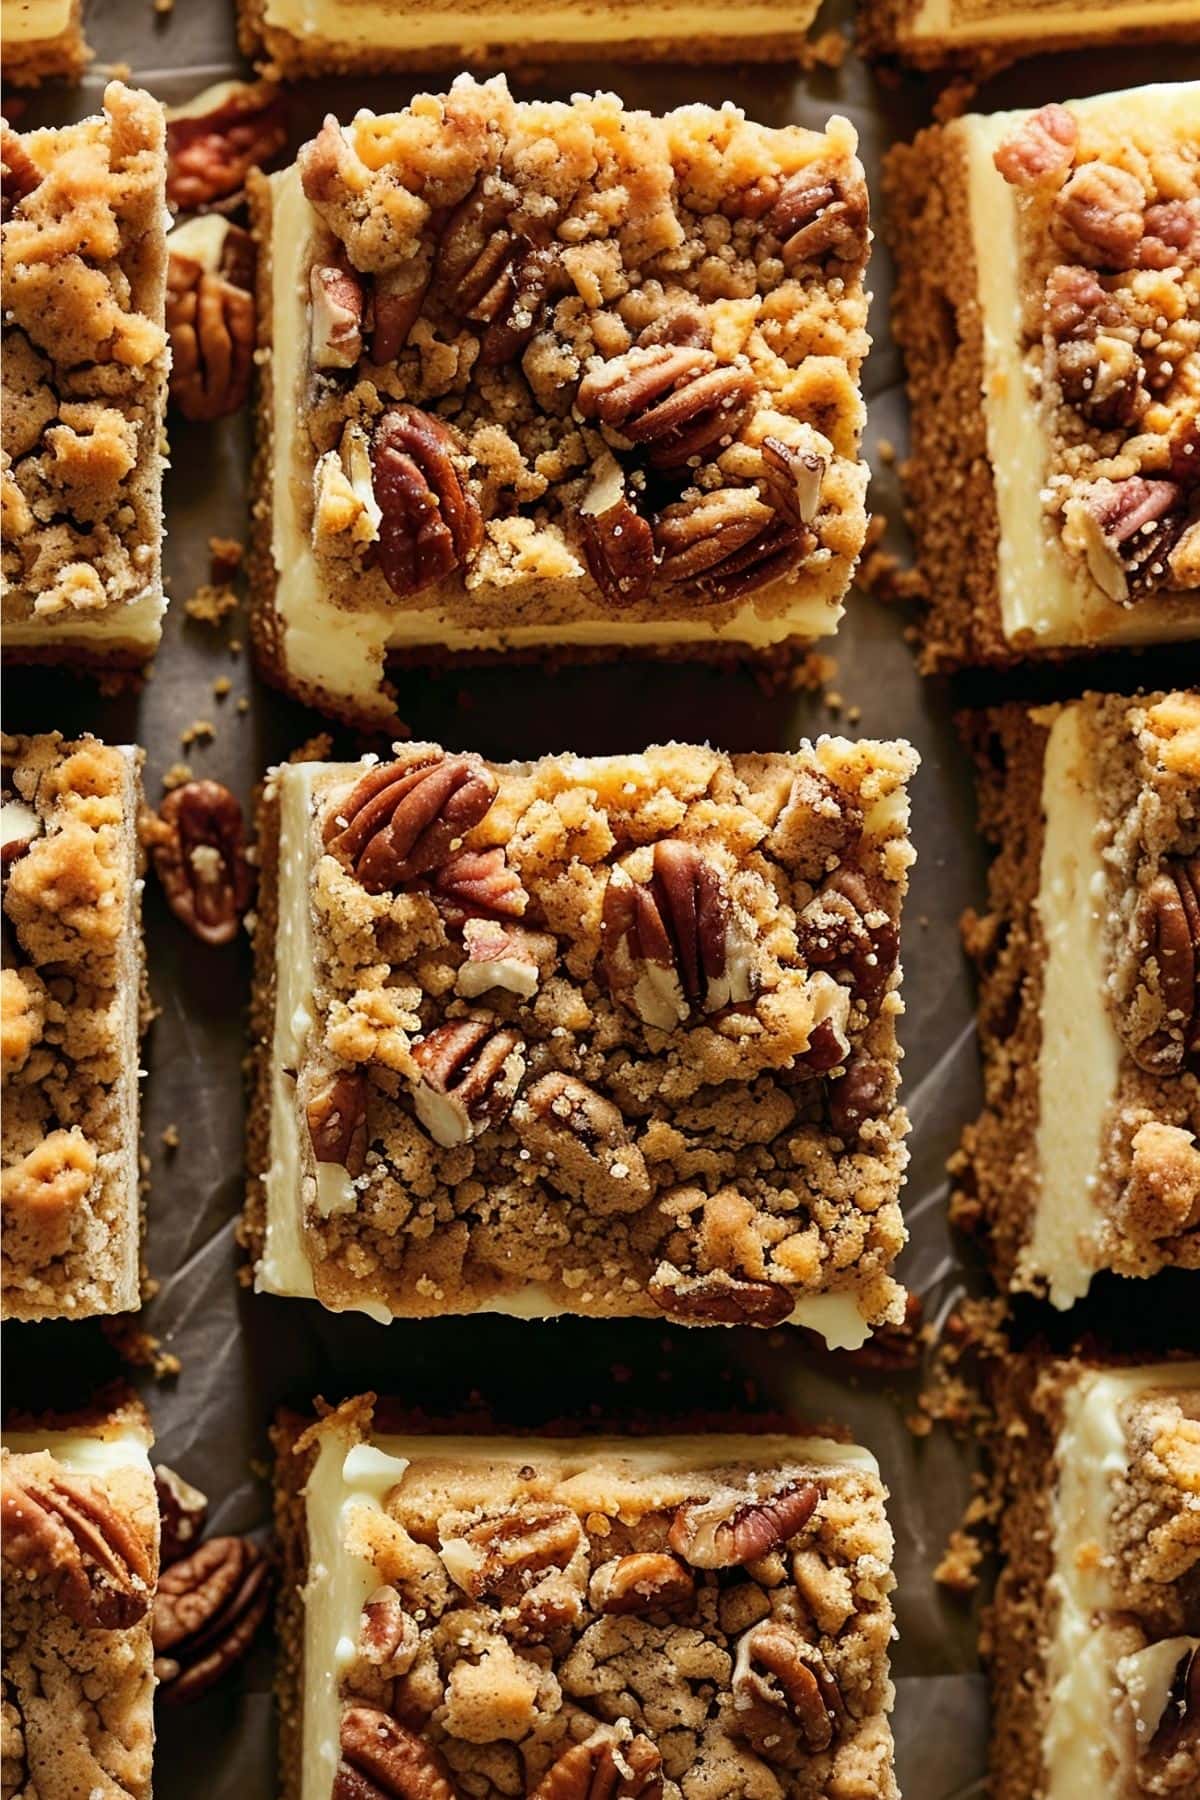 Top View of Squares of Cream Cheese Coffee Cake Bars with Brown Sugar Pecan Crumble